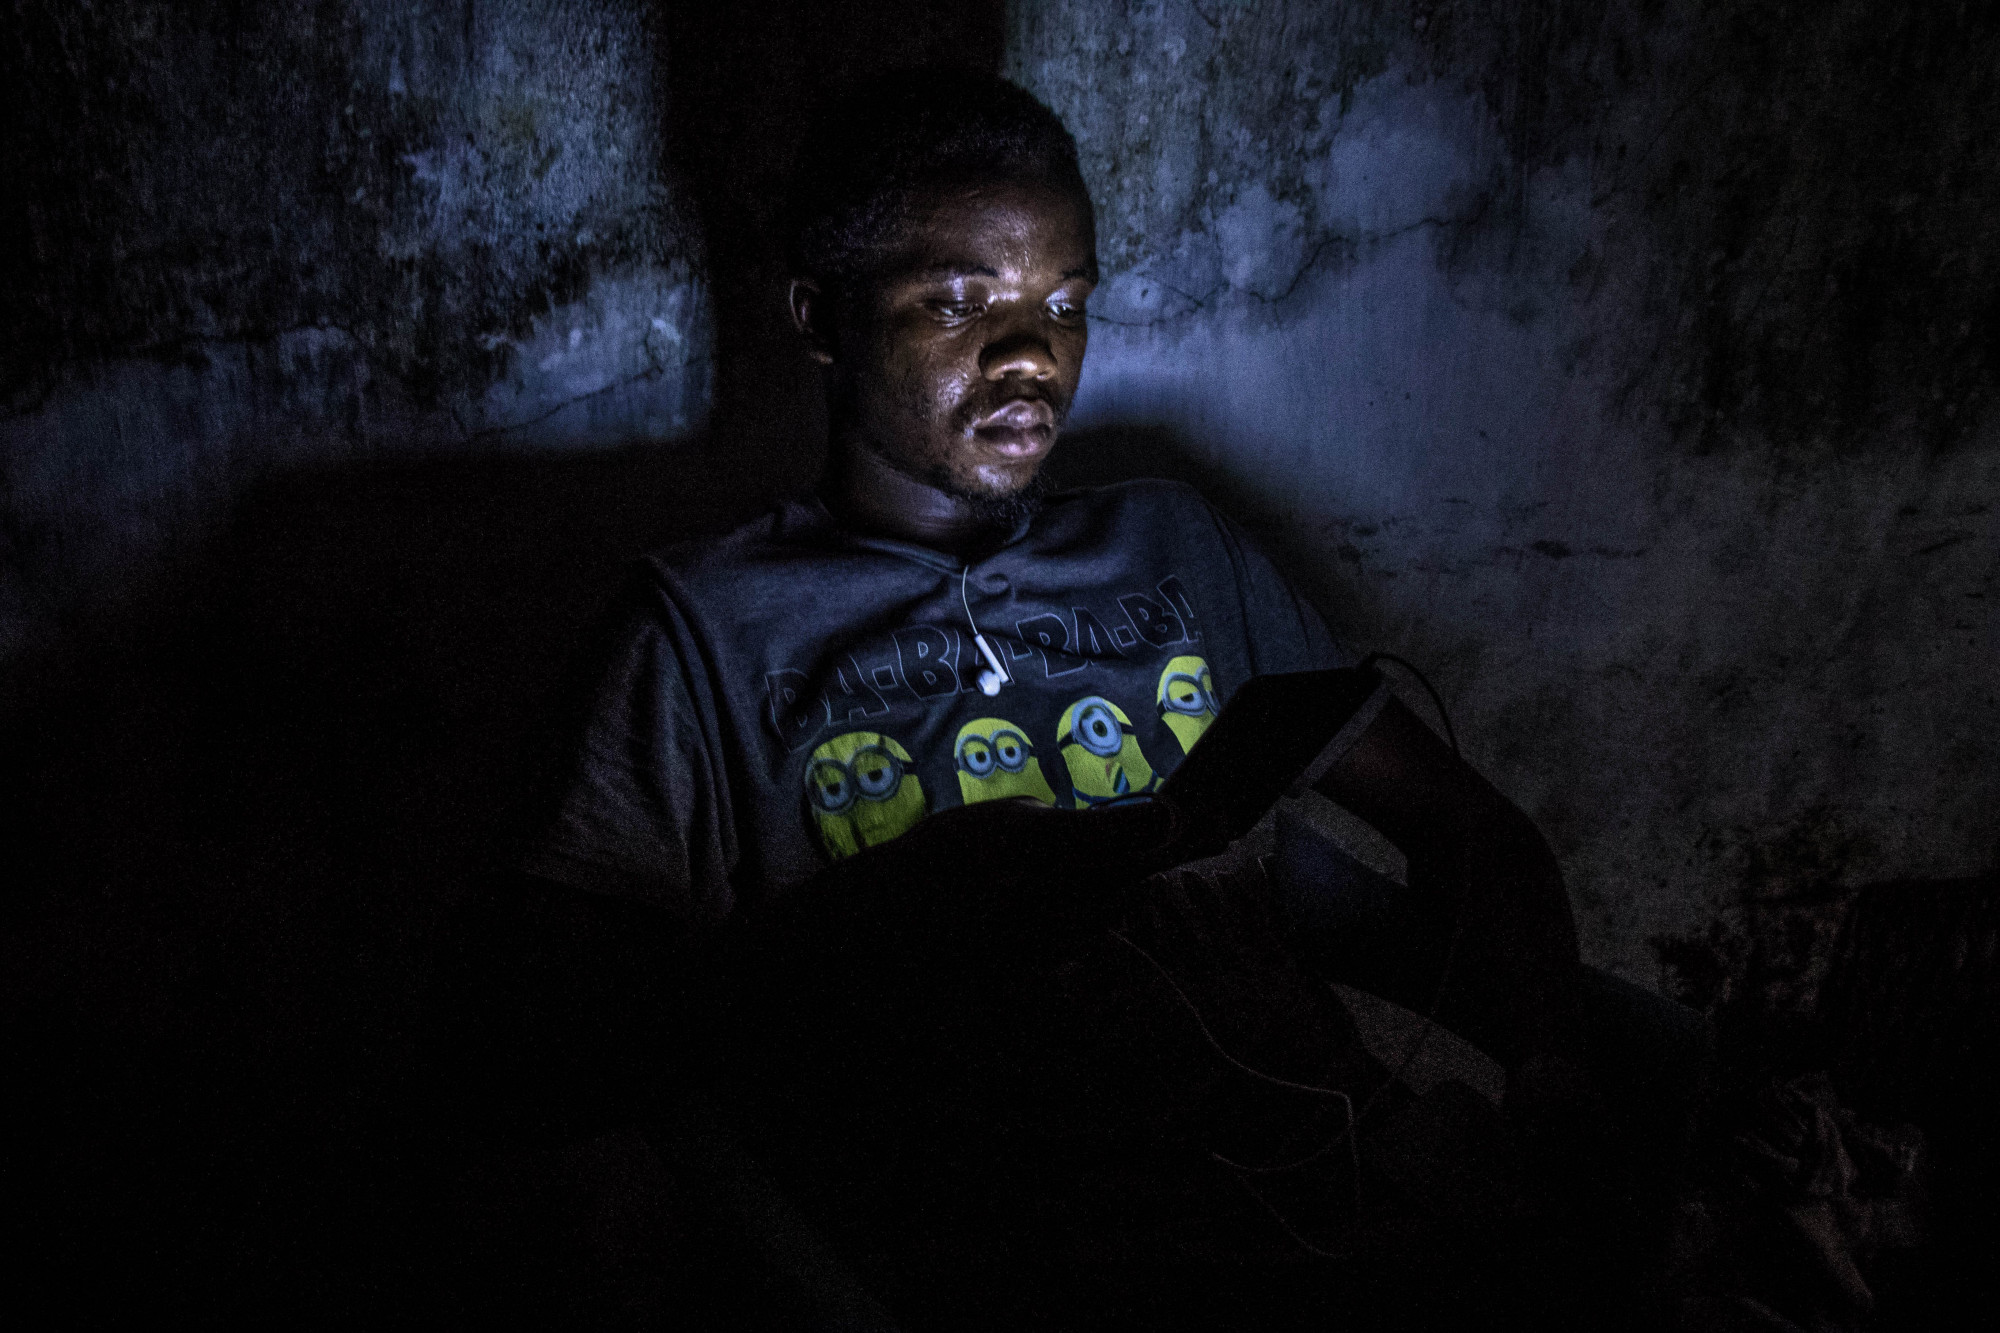 Mbudi, Kinshasa, DRC, May 2020. After paying to charge his phone at a communal charging station powered by a generator, a youth named David reads from his screen in the darkness in Mbudi, Kinshasa. © Justin Makangara for Fondation Carmignac